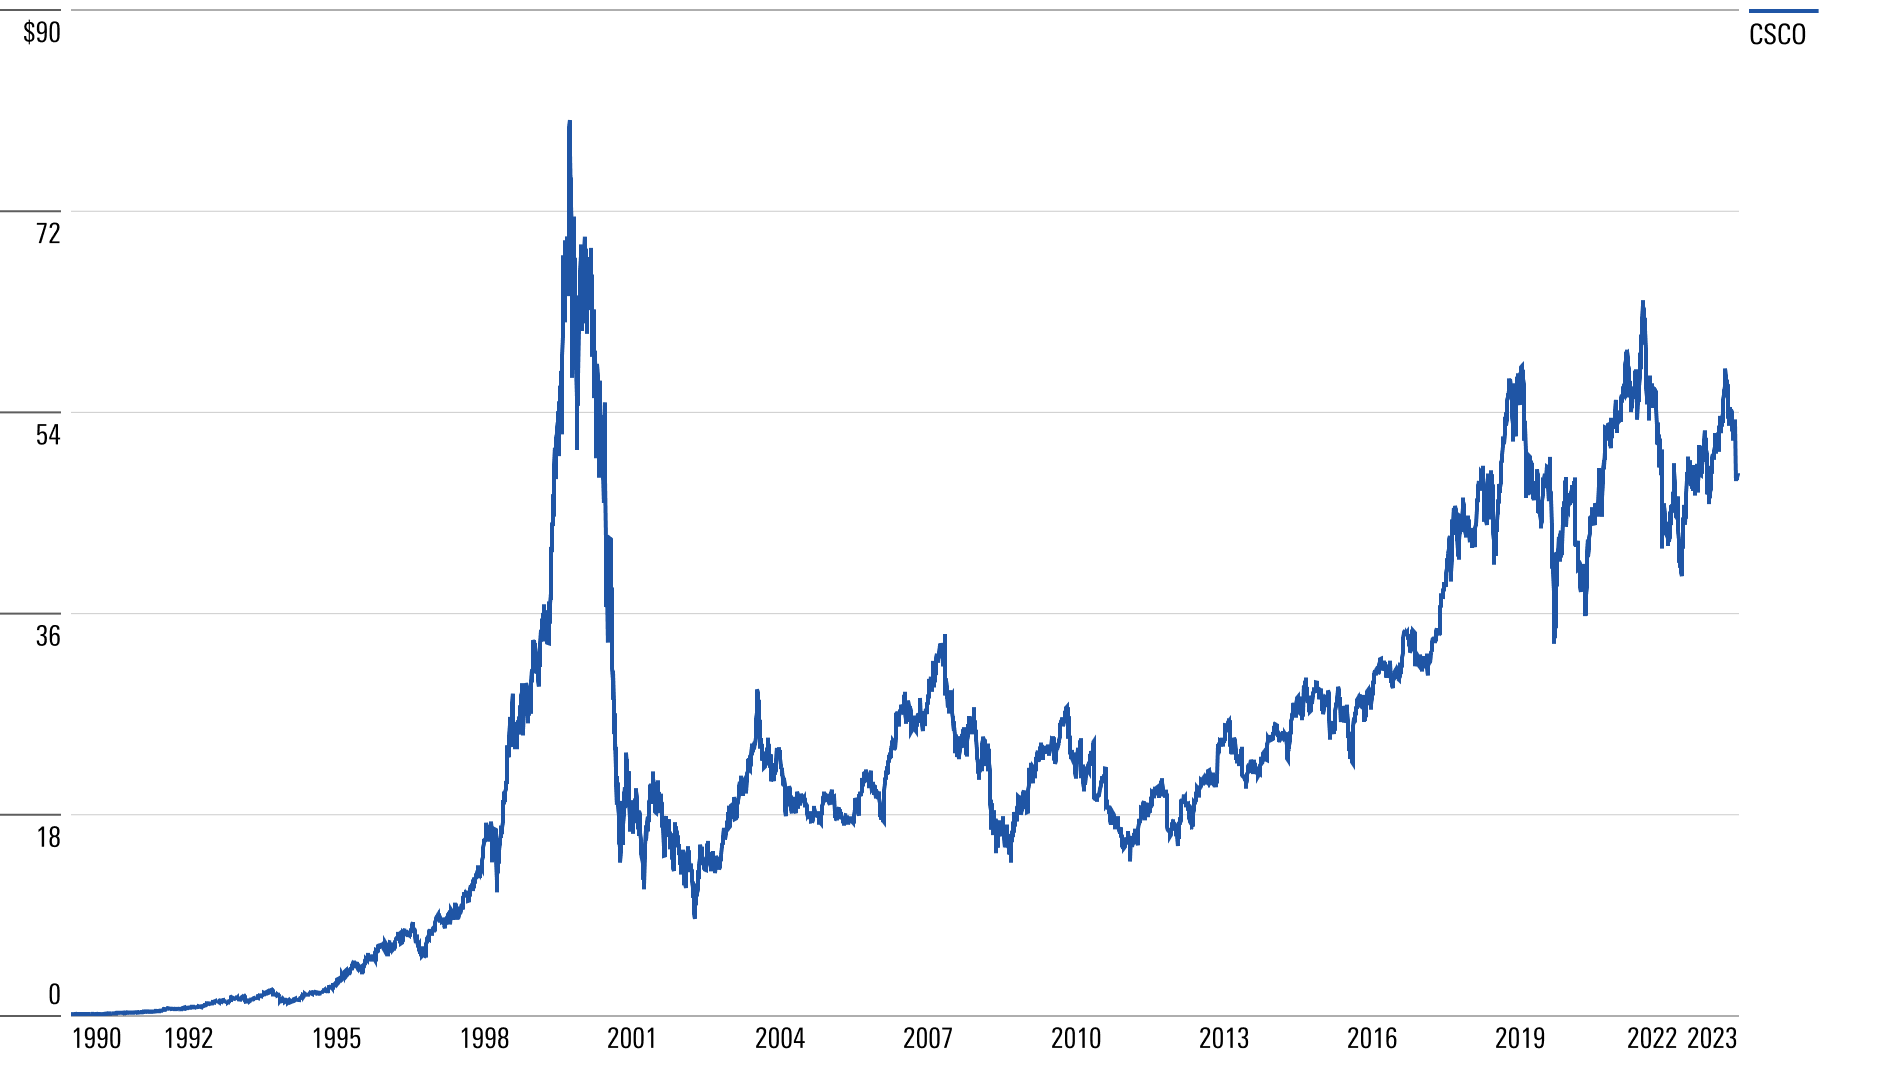 Line chart showing Cisco stock prices from through Feb. 16, 1990 through Dec. 4, 2023.